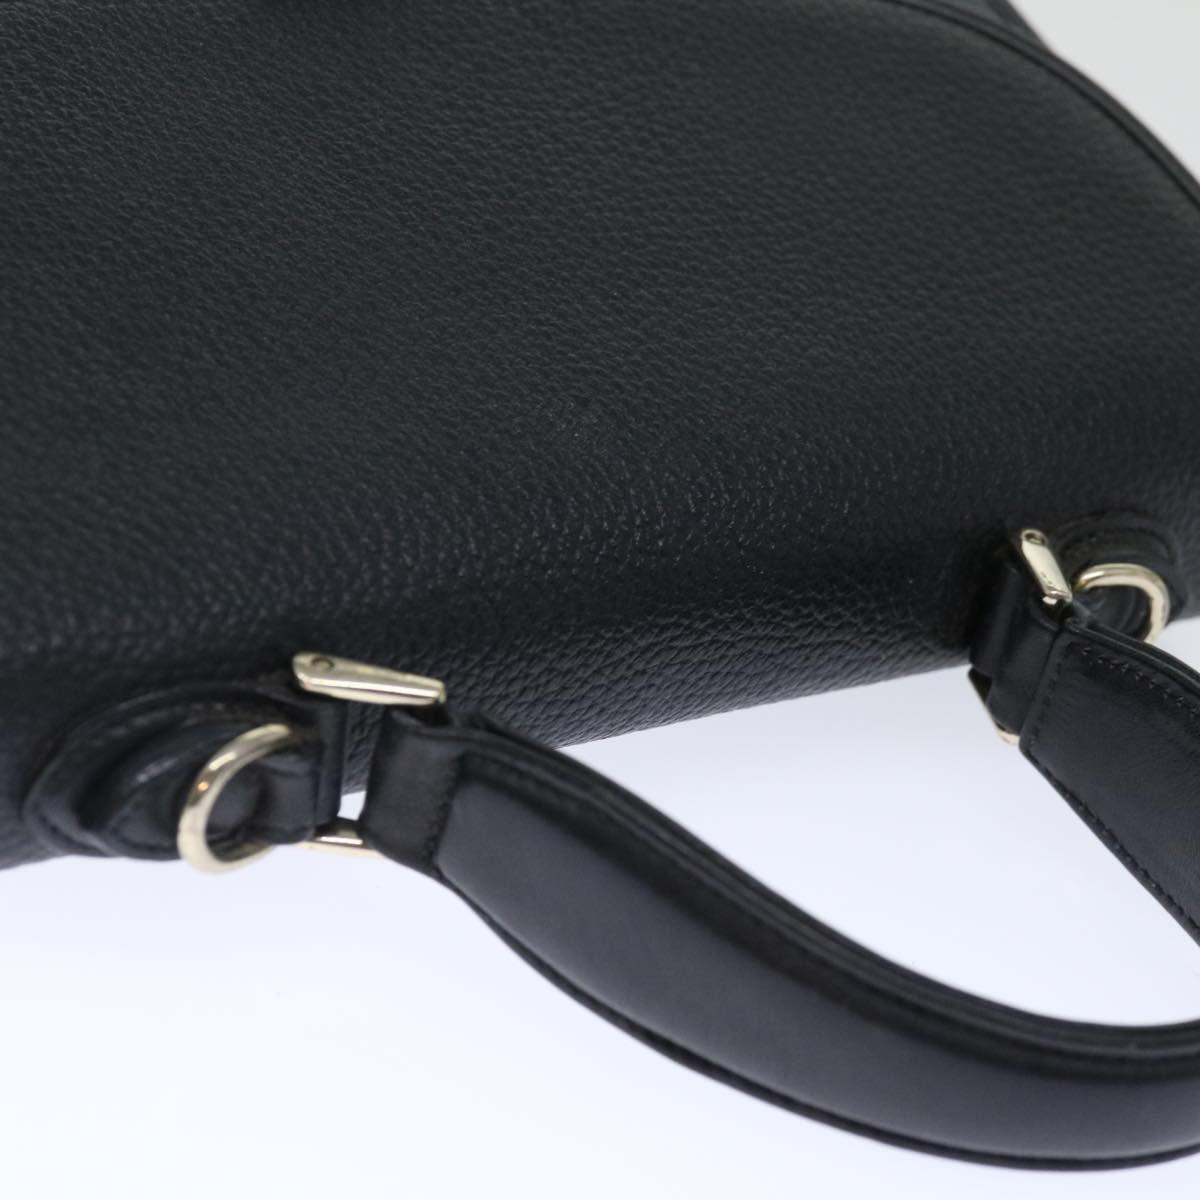 Burberrys Hand Bag Leather Black Auth 72442